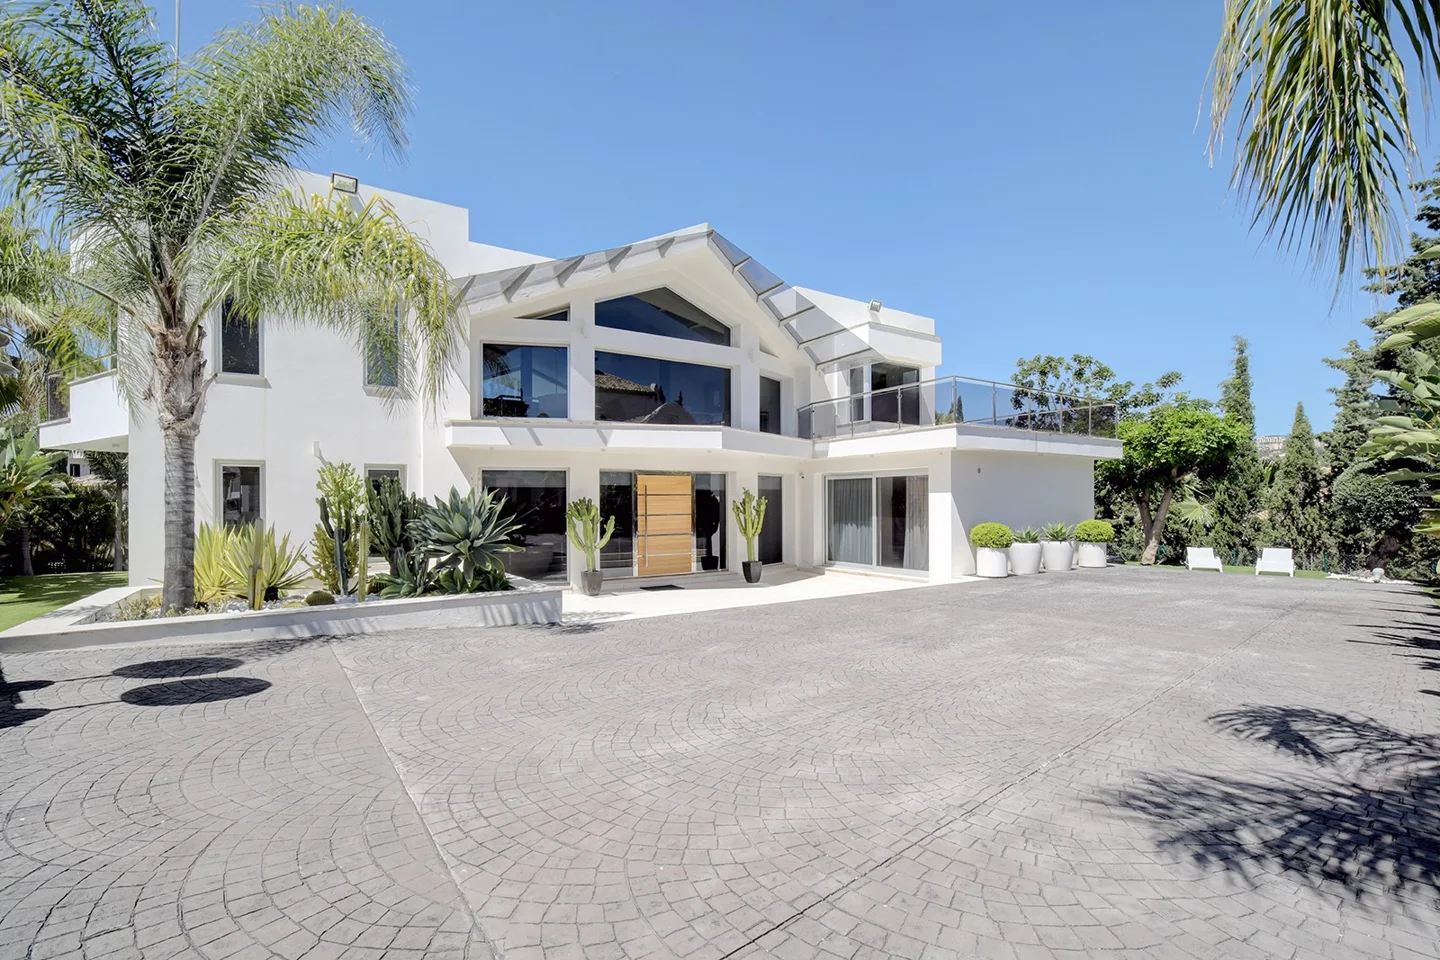 Modern villa in Los Naranjos Golf located in a gated community